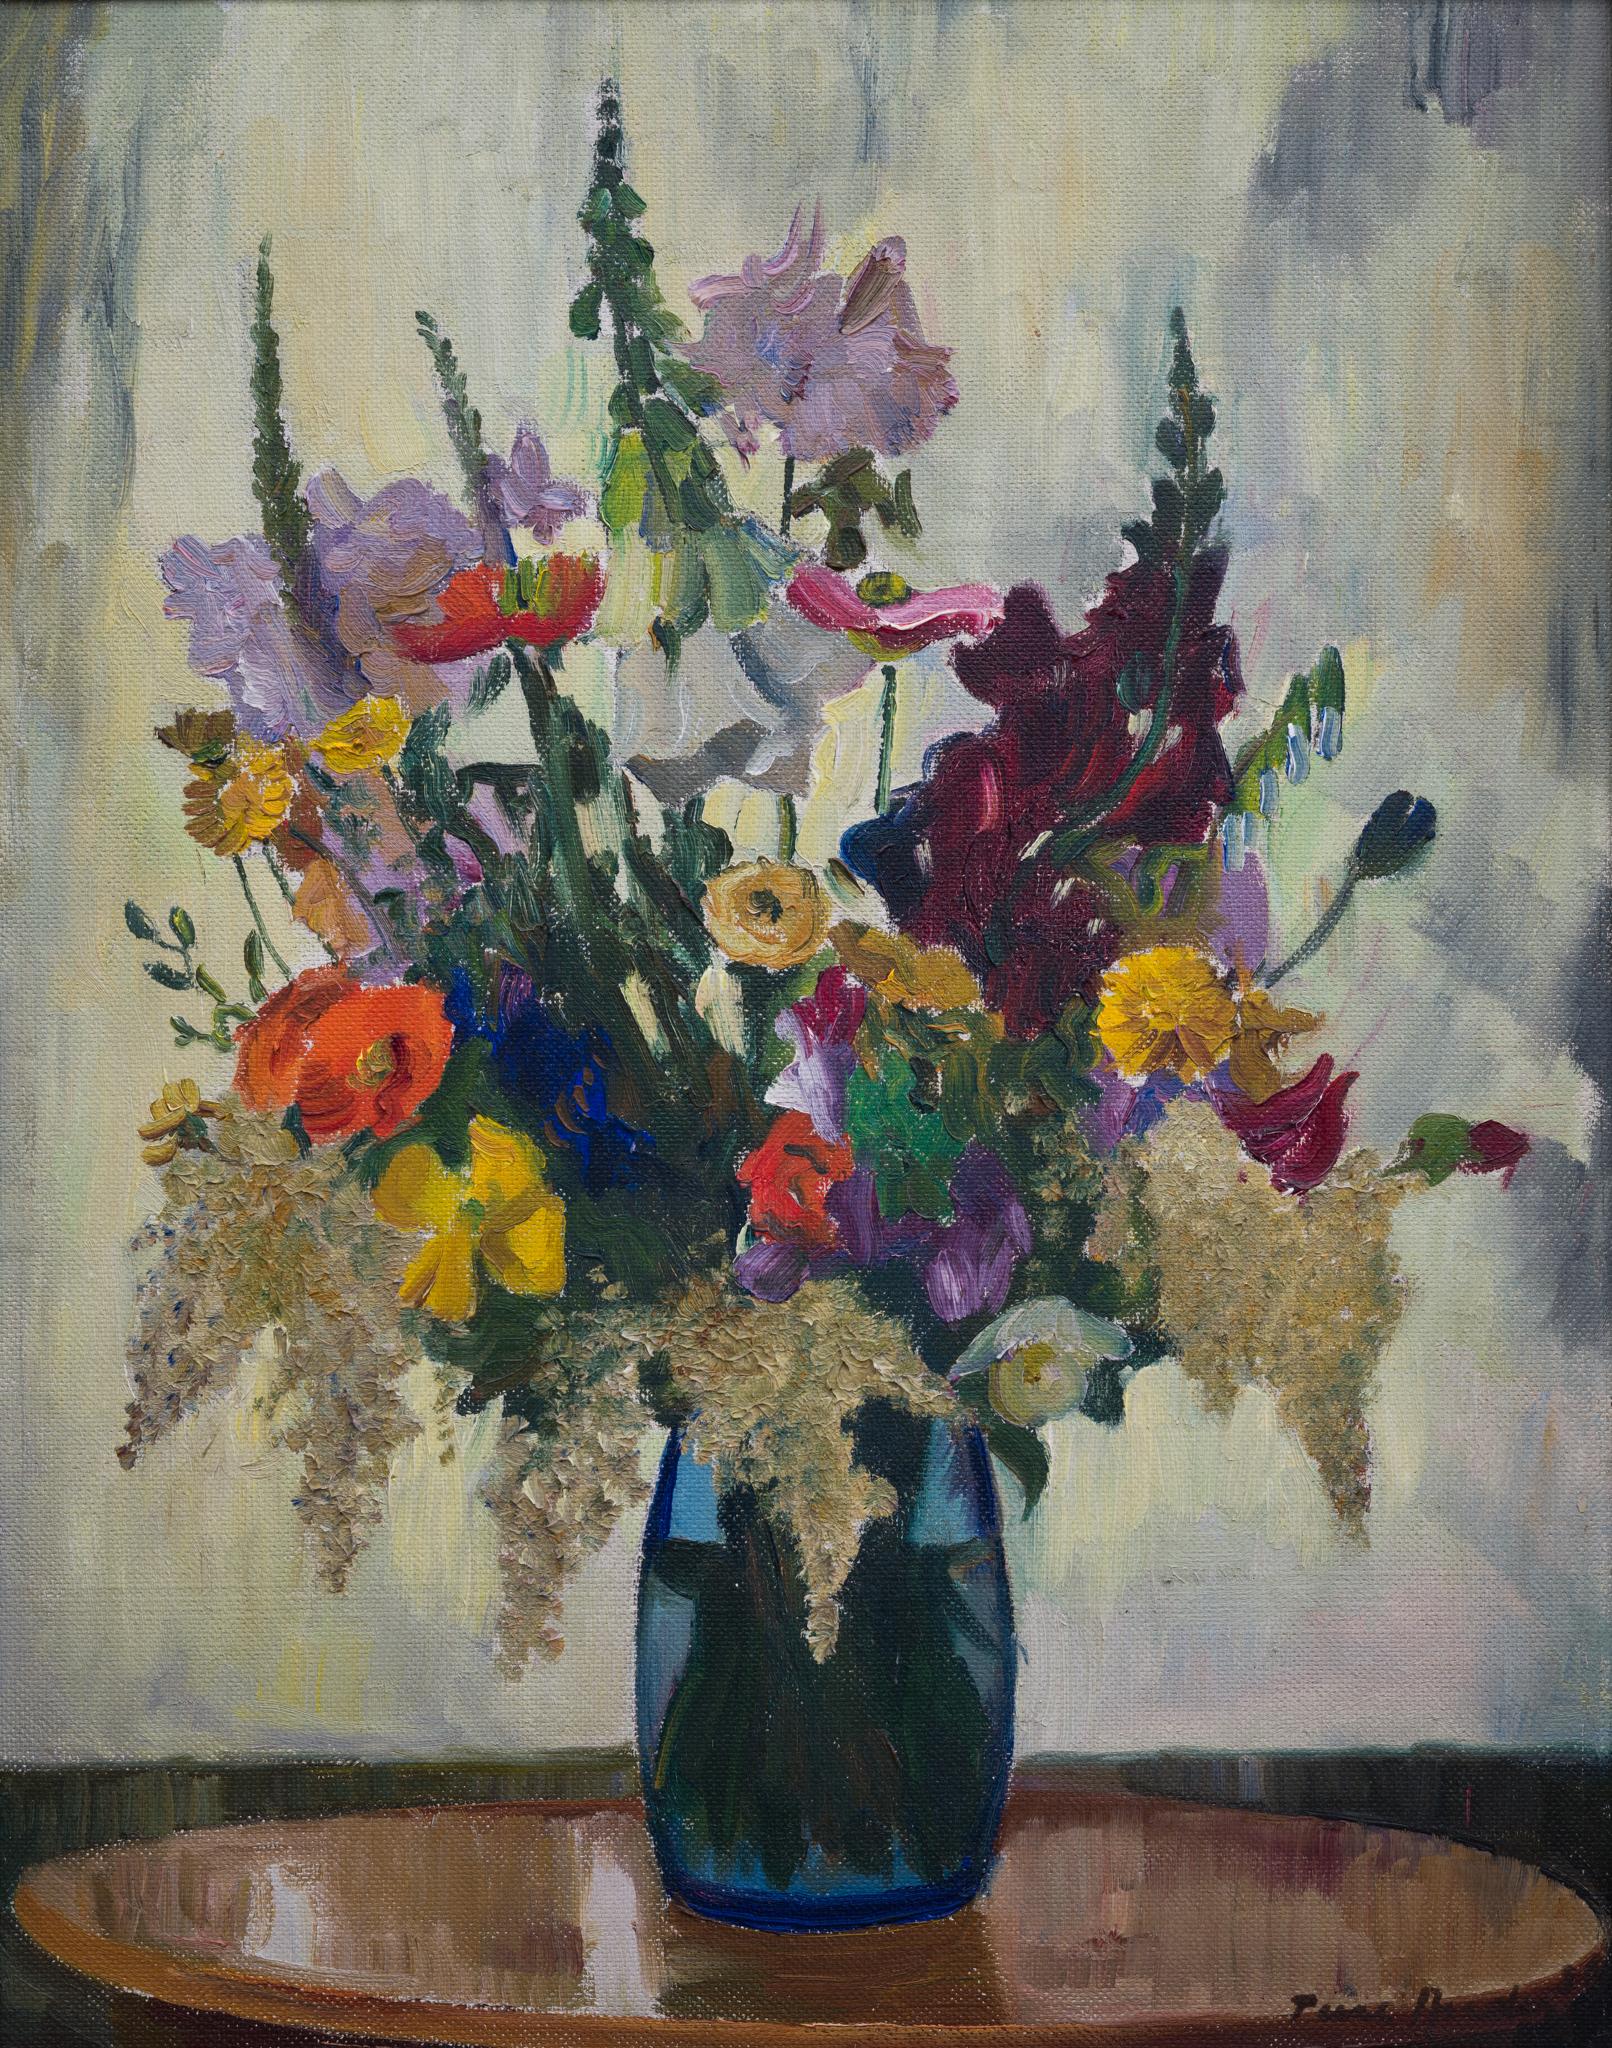 Ture Ander (1881-1959) Sweden

Floral Symphony, 1936

oil on board
signed and dated Ture Ander 36
board dimensions 24,41 x 18,90 inches (62 x 48 cm)
frame 29,13 x 24,02 inches (74 x 61 cm)

Provenance: 
A private collection, Värmland, Sweden.